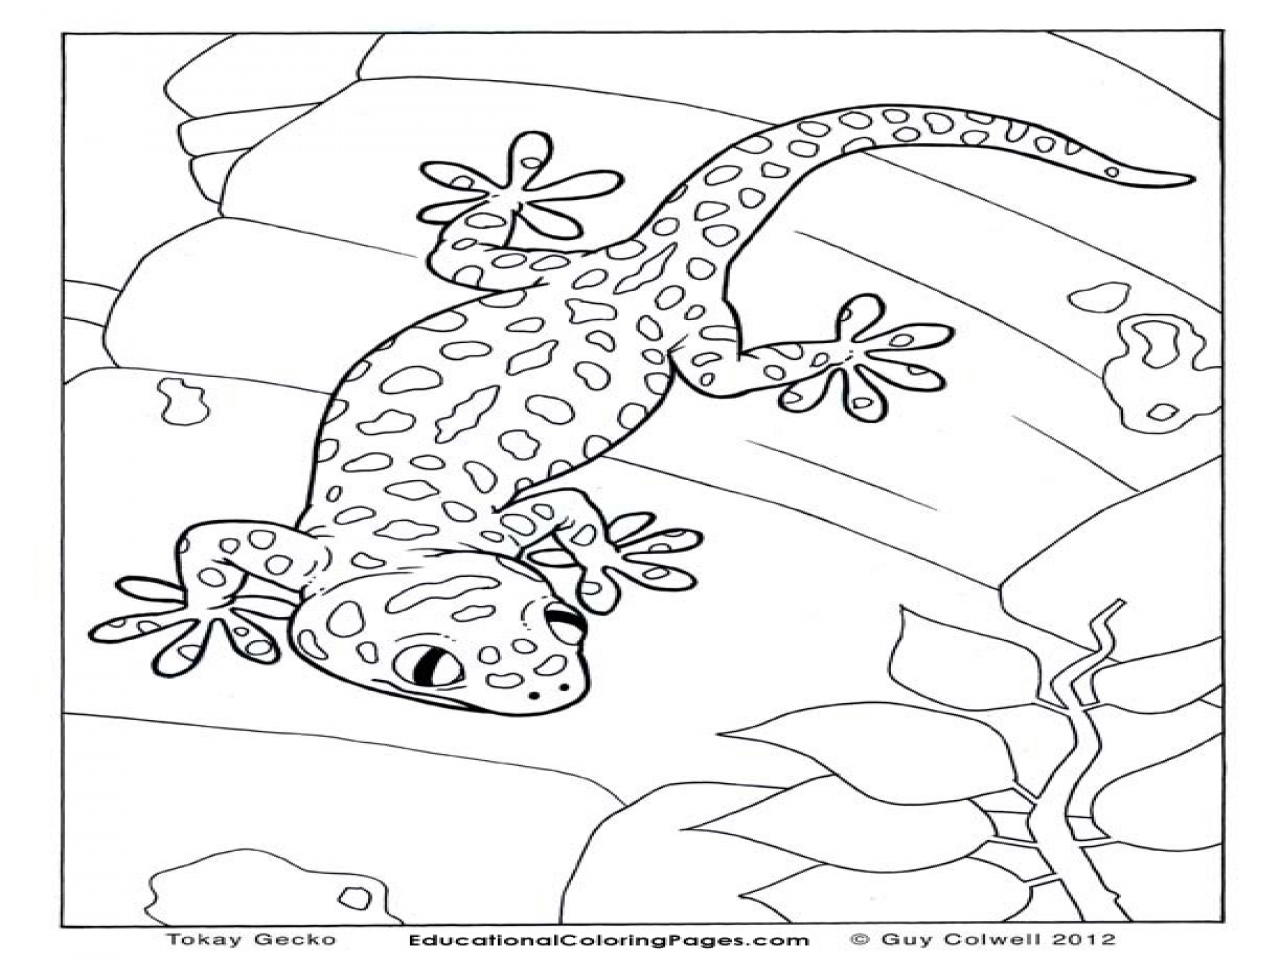 leopard-gecko-sheets-coloring-pages